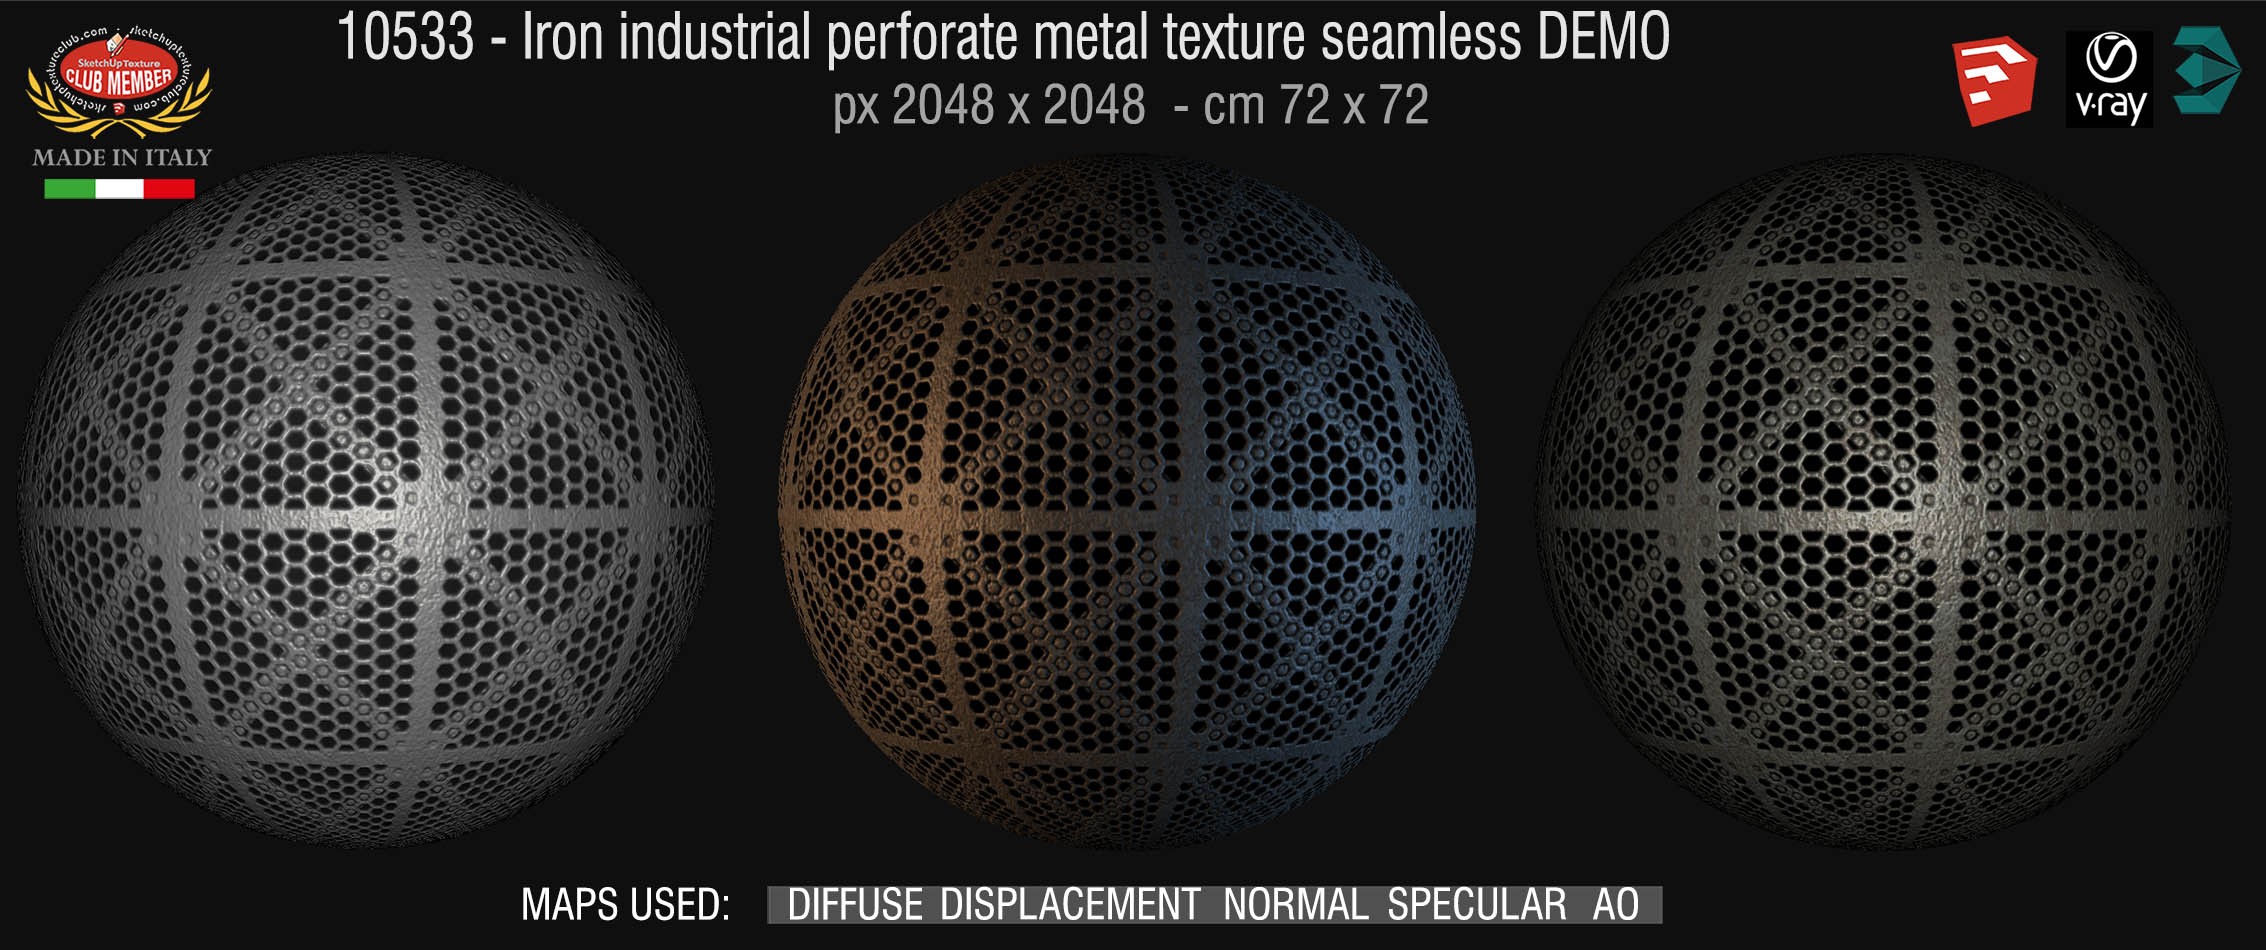 10533 HR Iron industrial perforate metal texture seamless + maps DEMO